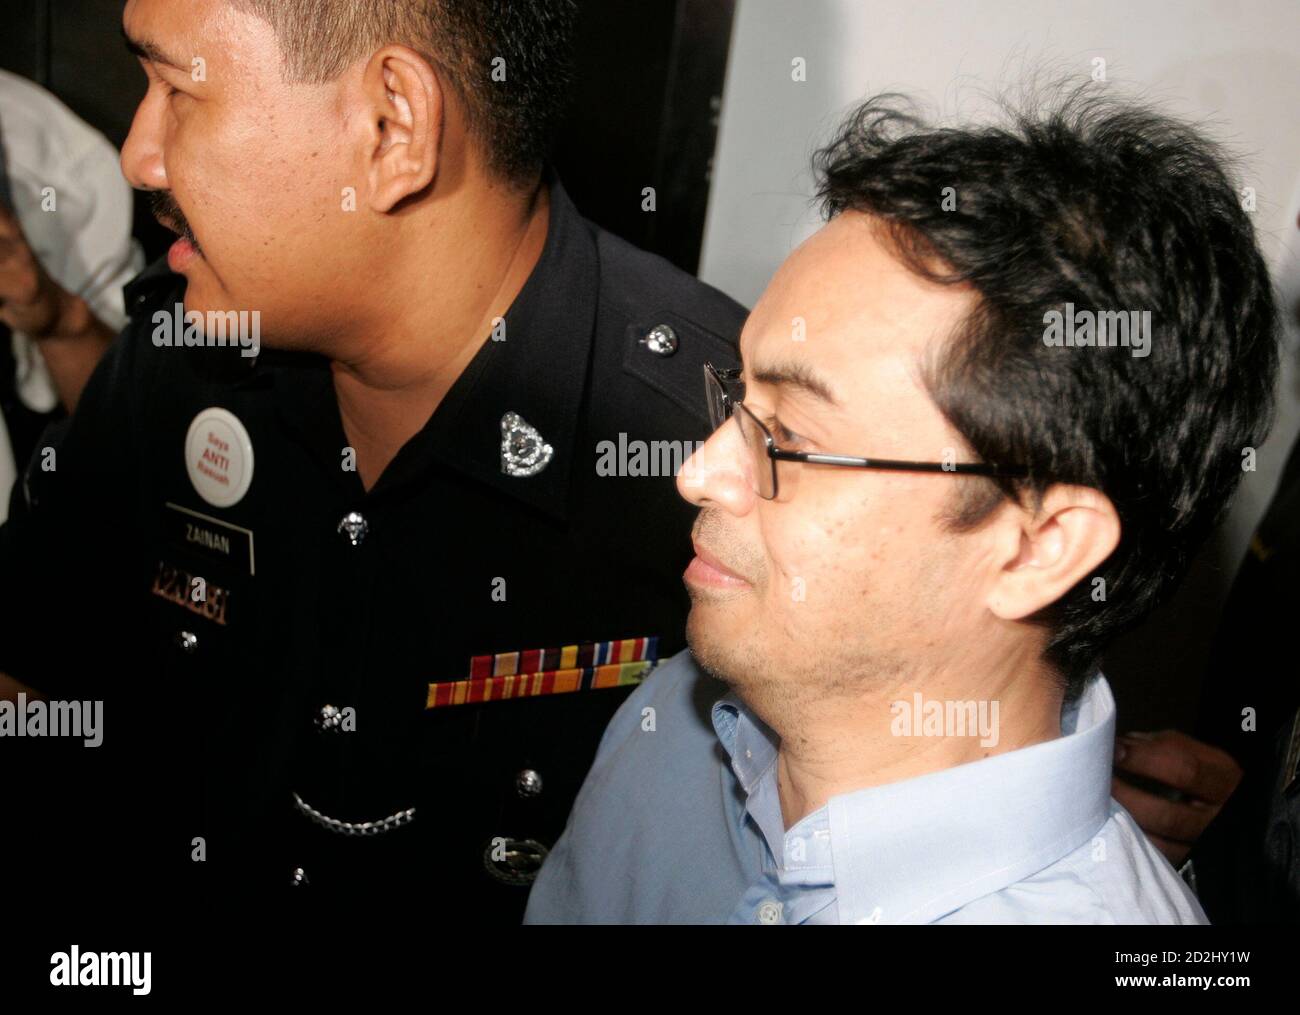 Abdul Razak Abdullah Baginda is escorted by police as he arrives at a courthouse in Shah Alam outside Kuala Lumpur June 4, 2007. Malaysia postponed on Monday the trial of a prominent political analyst accused of involvement in the murder of a Mongolian model, Altantuya Shaariibuu, feeding months of frenzied speculation about government links to the case.   REUTERS/Zainal Abd Halim (MALAYSIA) Stock Photo